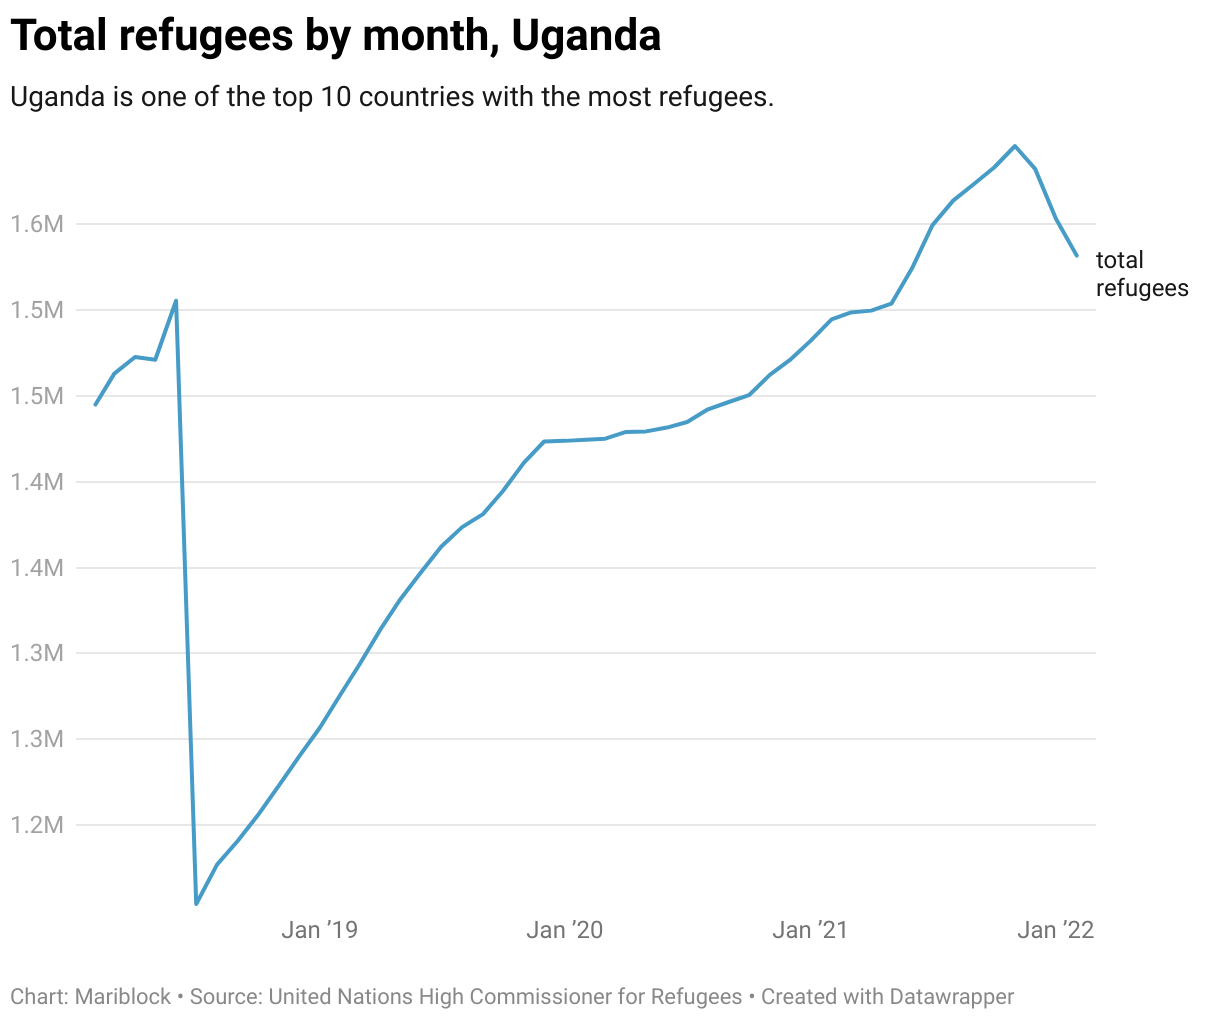 A line chart showing the total number of refugees in Uganda.